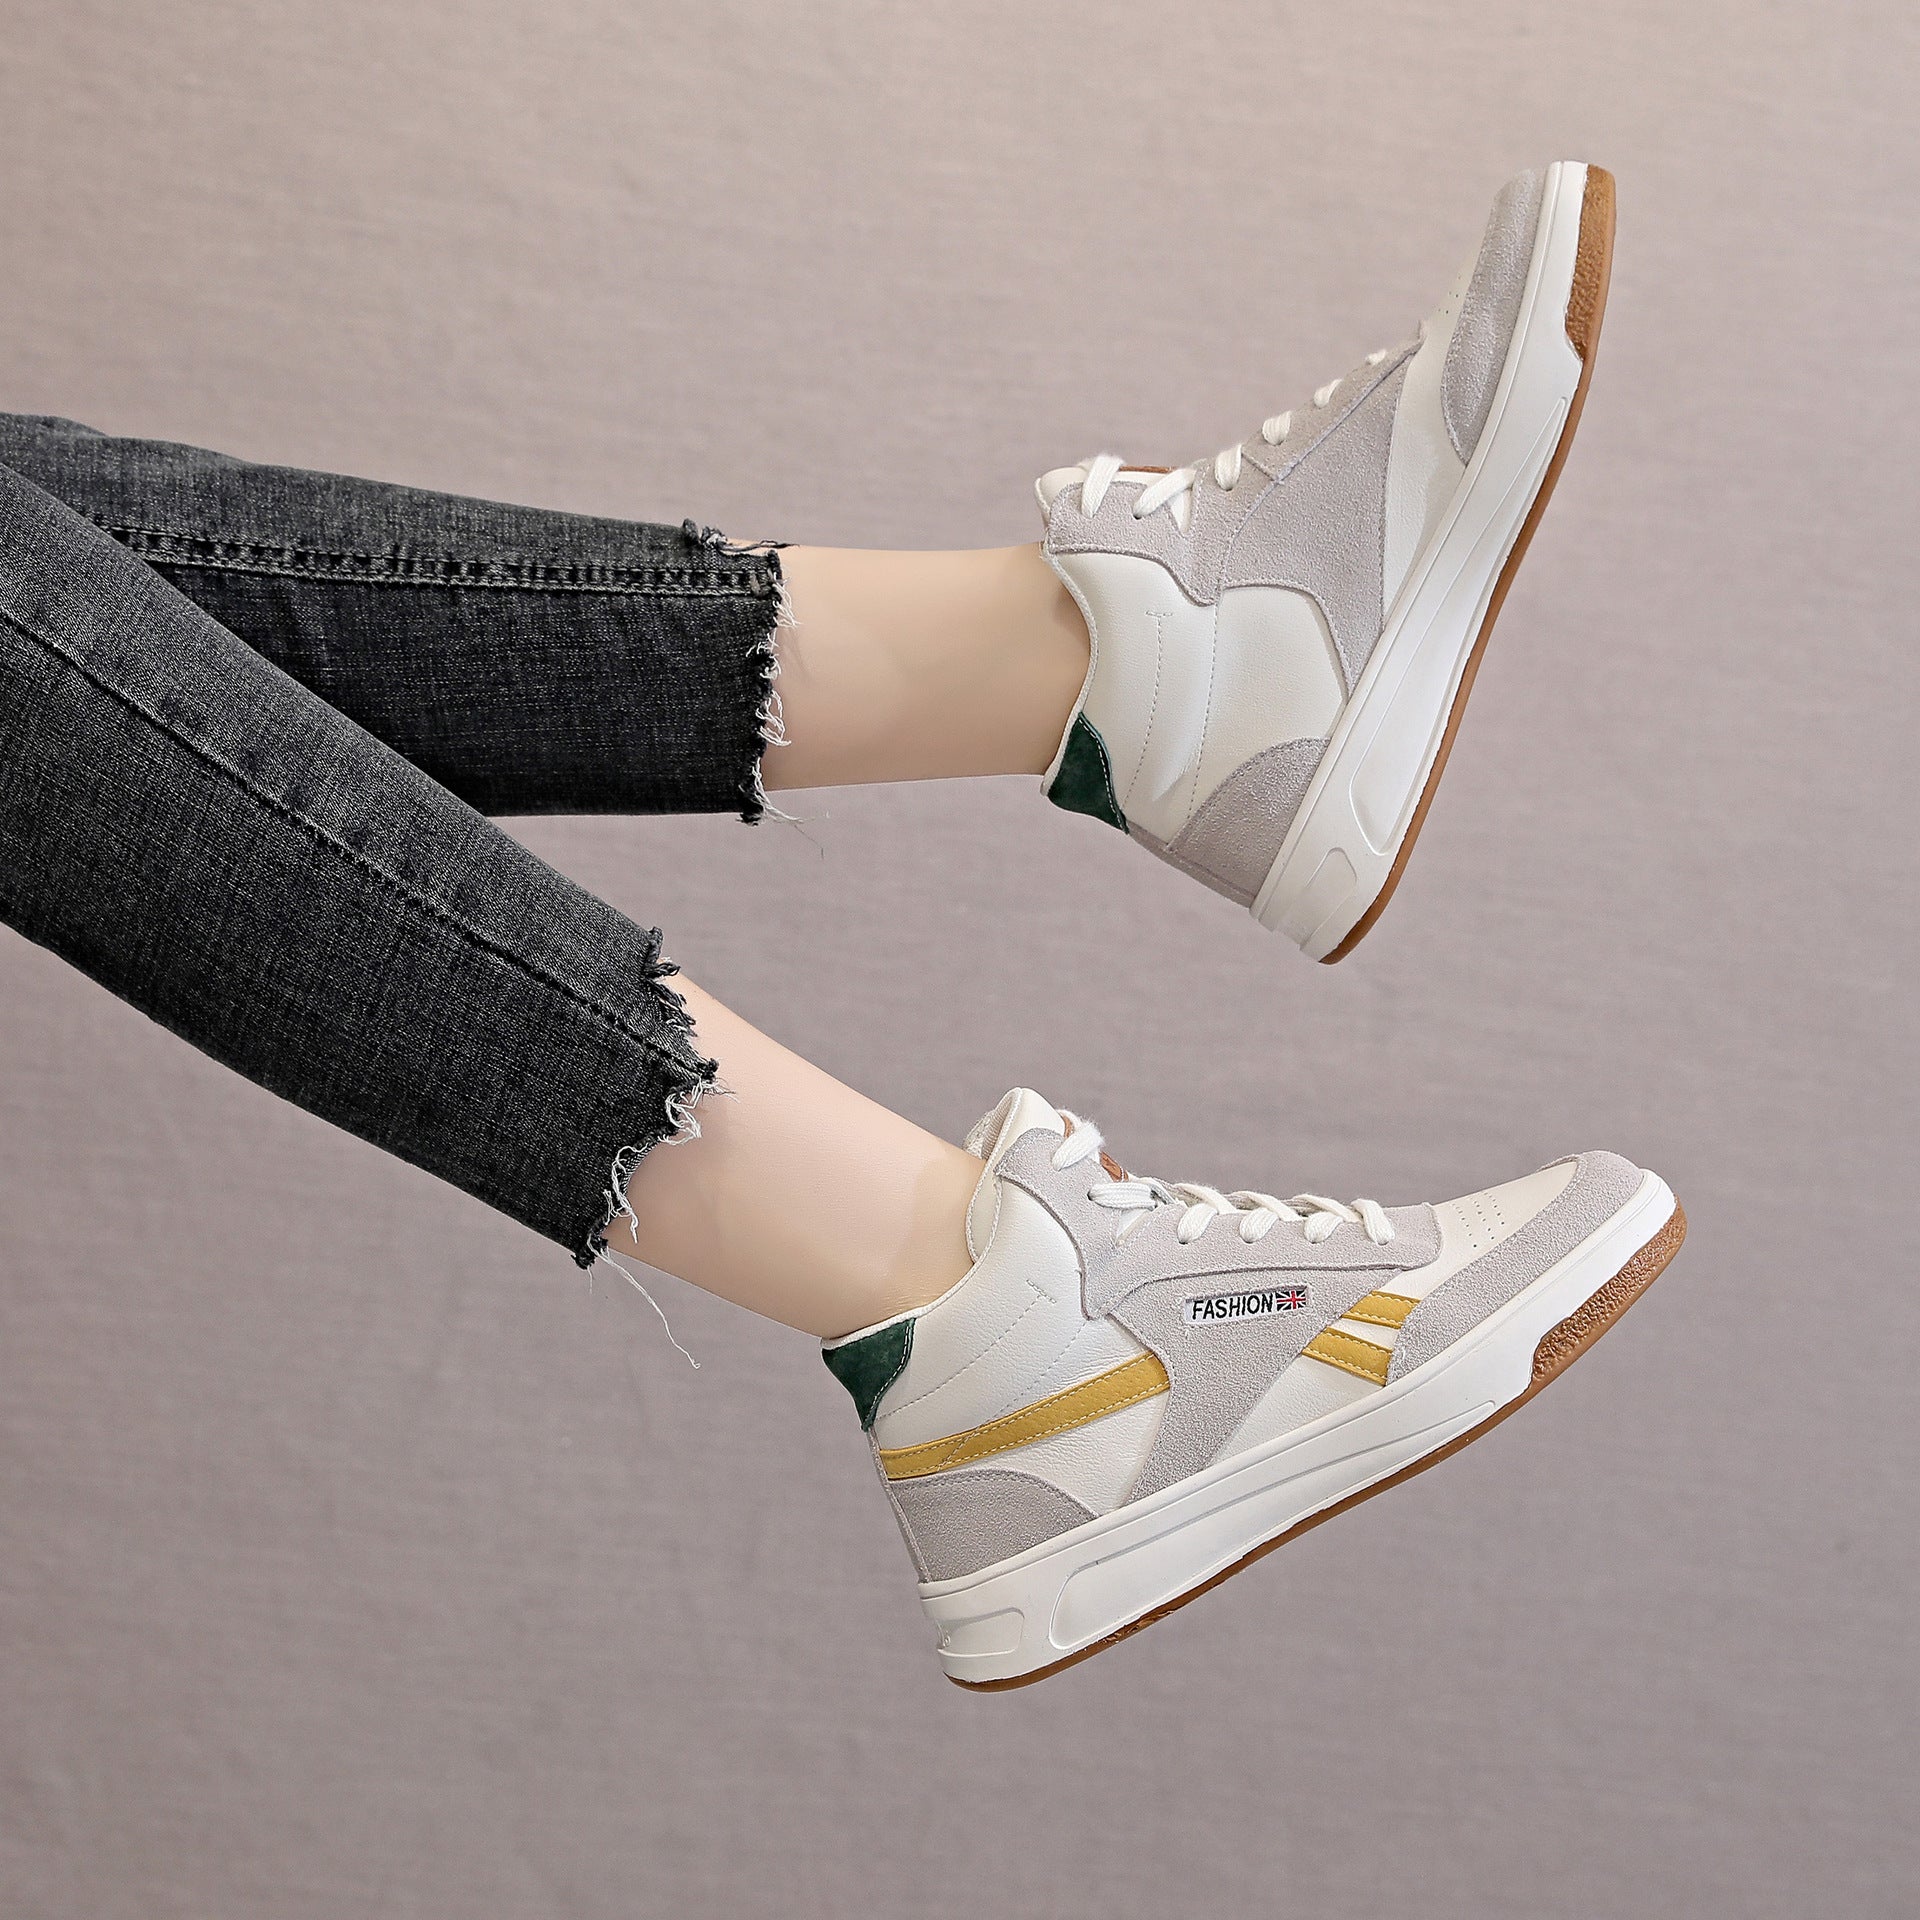 Classy Charming Women's White Korean With Sneakers